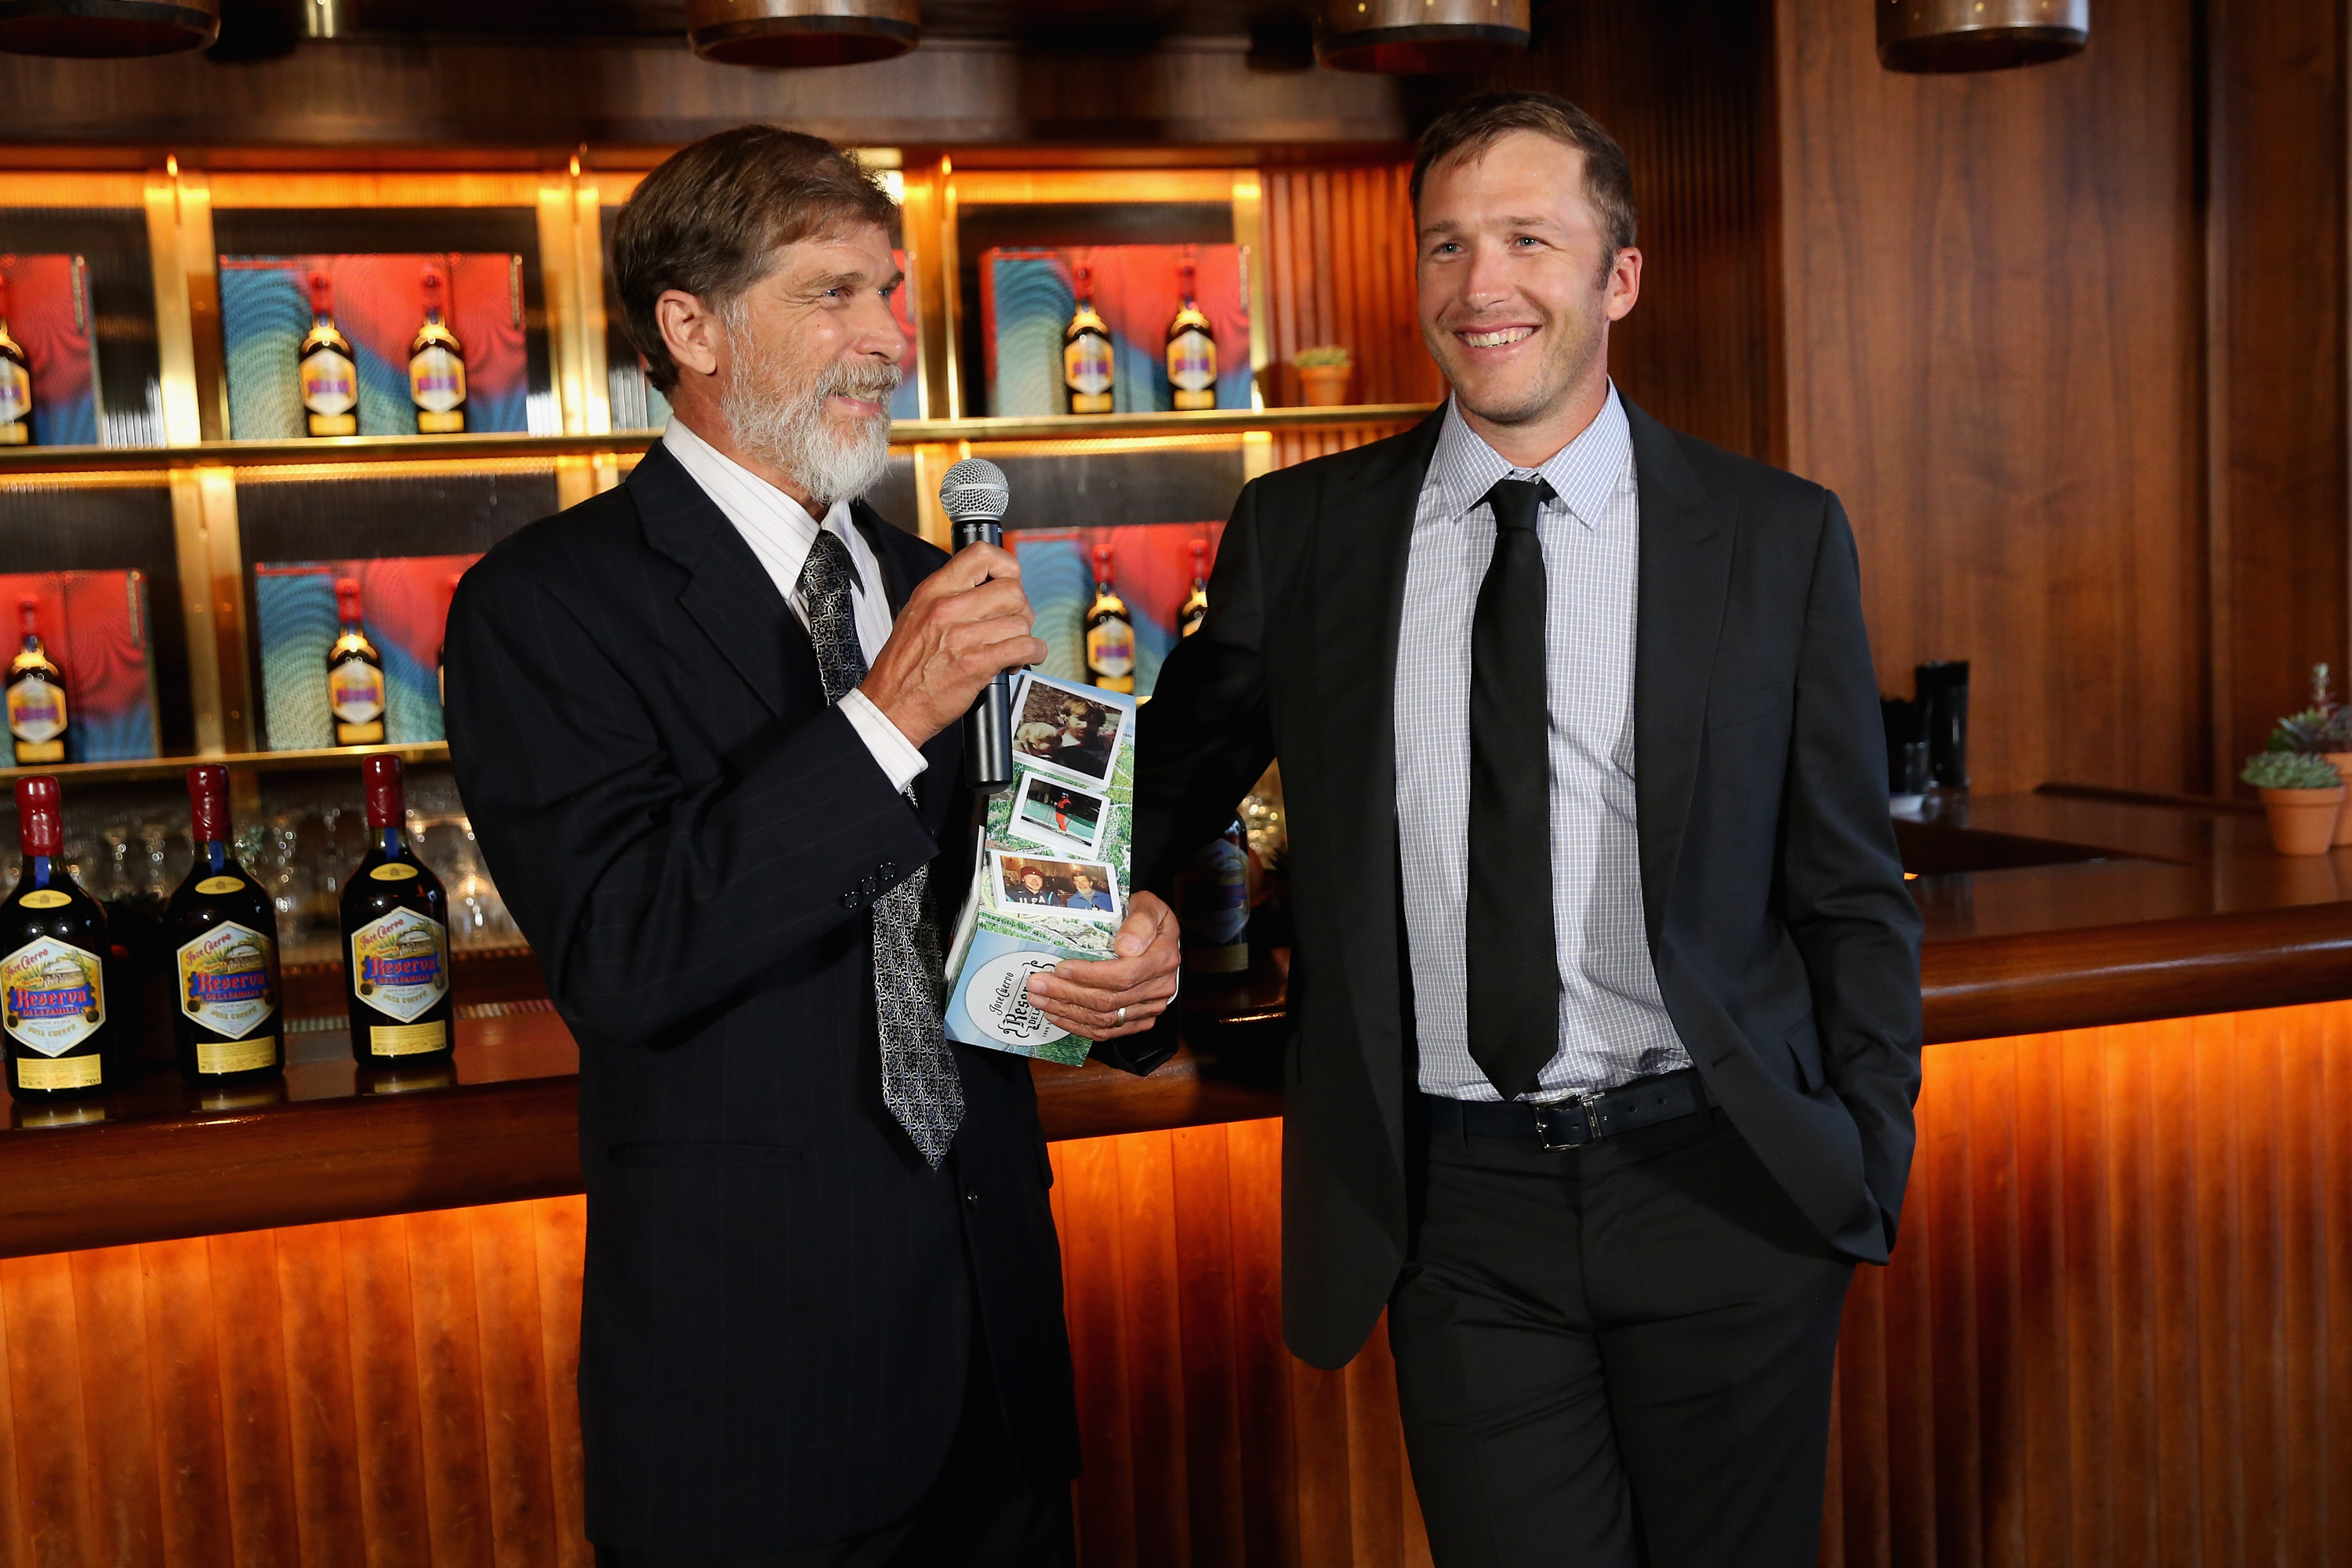 NEW YORK, NY - JUNE 15:  Woody Miller and Gold Medalist Bode Miller celebrate Father's Day with Jose Cuervo's Reserva De La Familia on June 15, 2015 in New York City.  (Photo by Cindy Ord/Getty Images for Jose Cuervo)